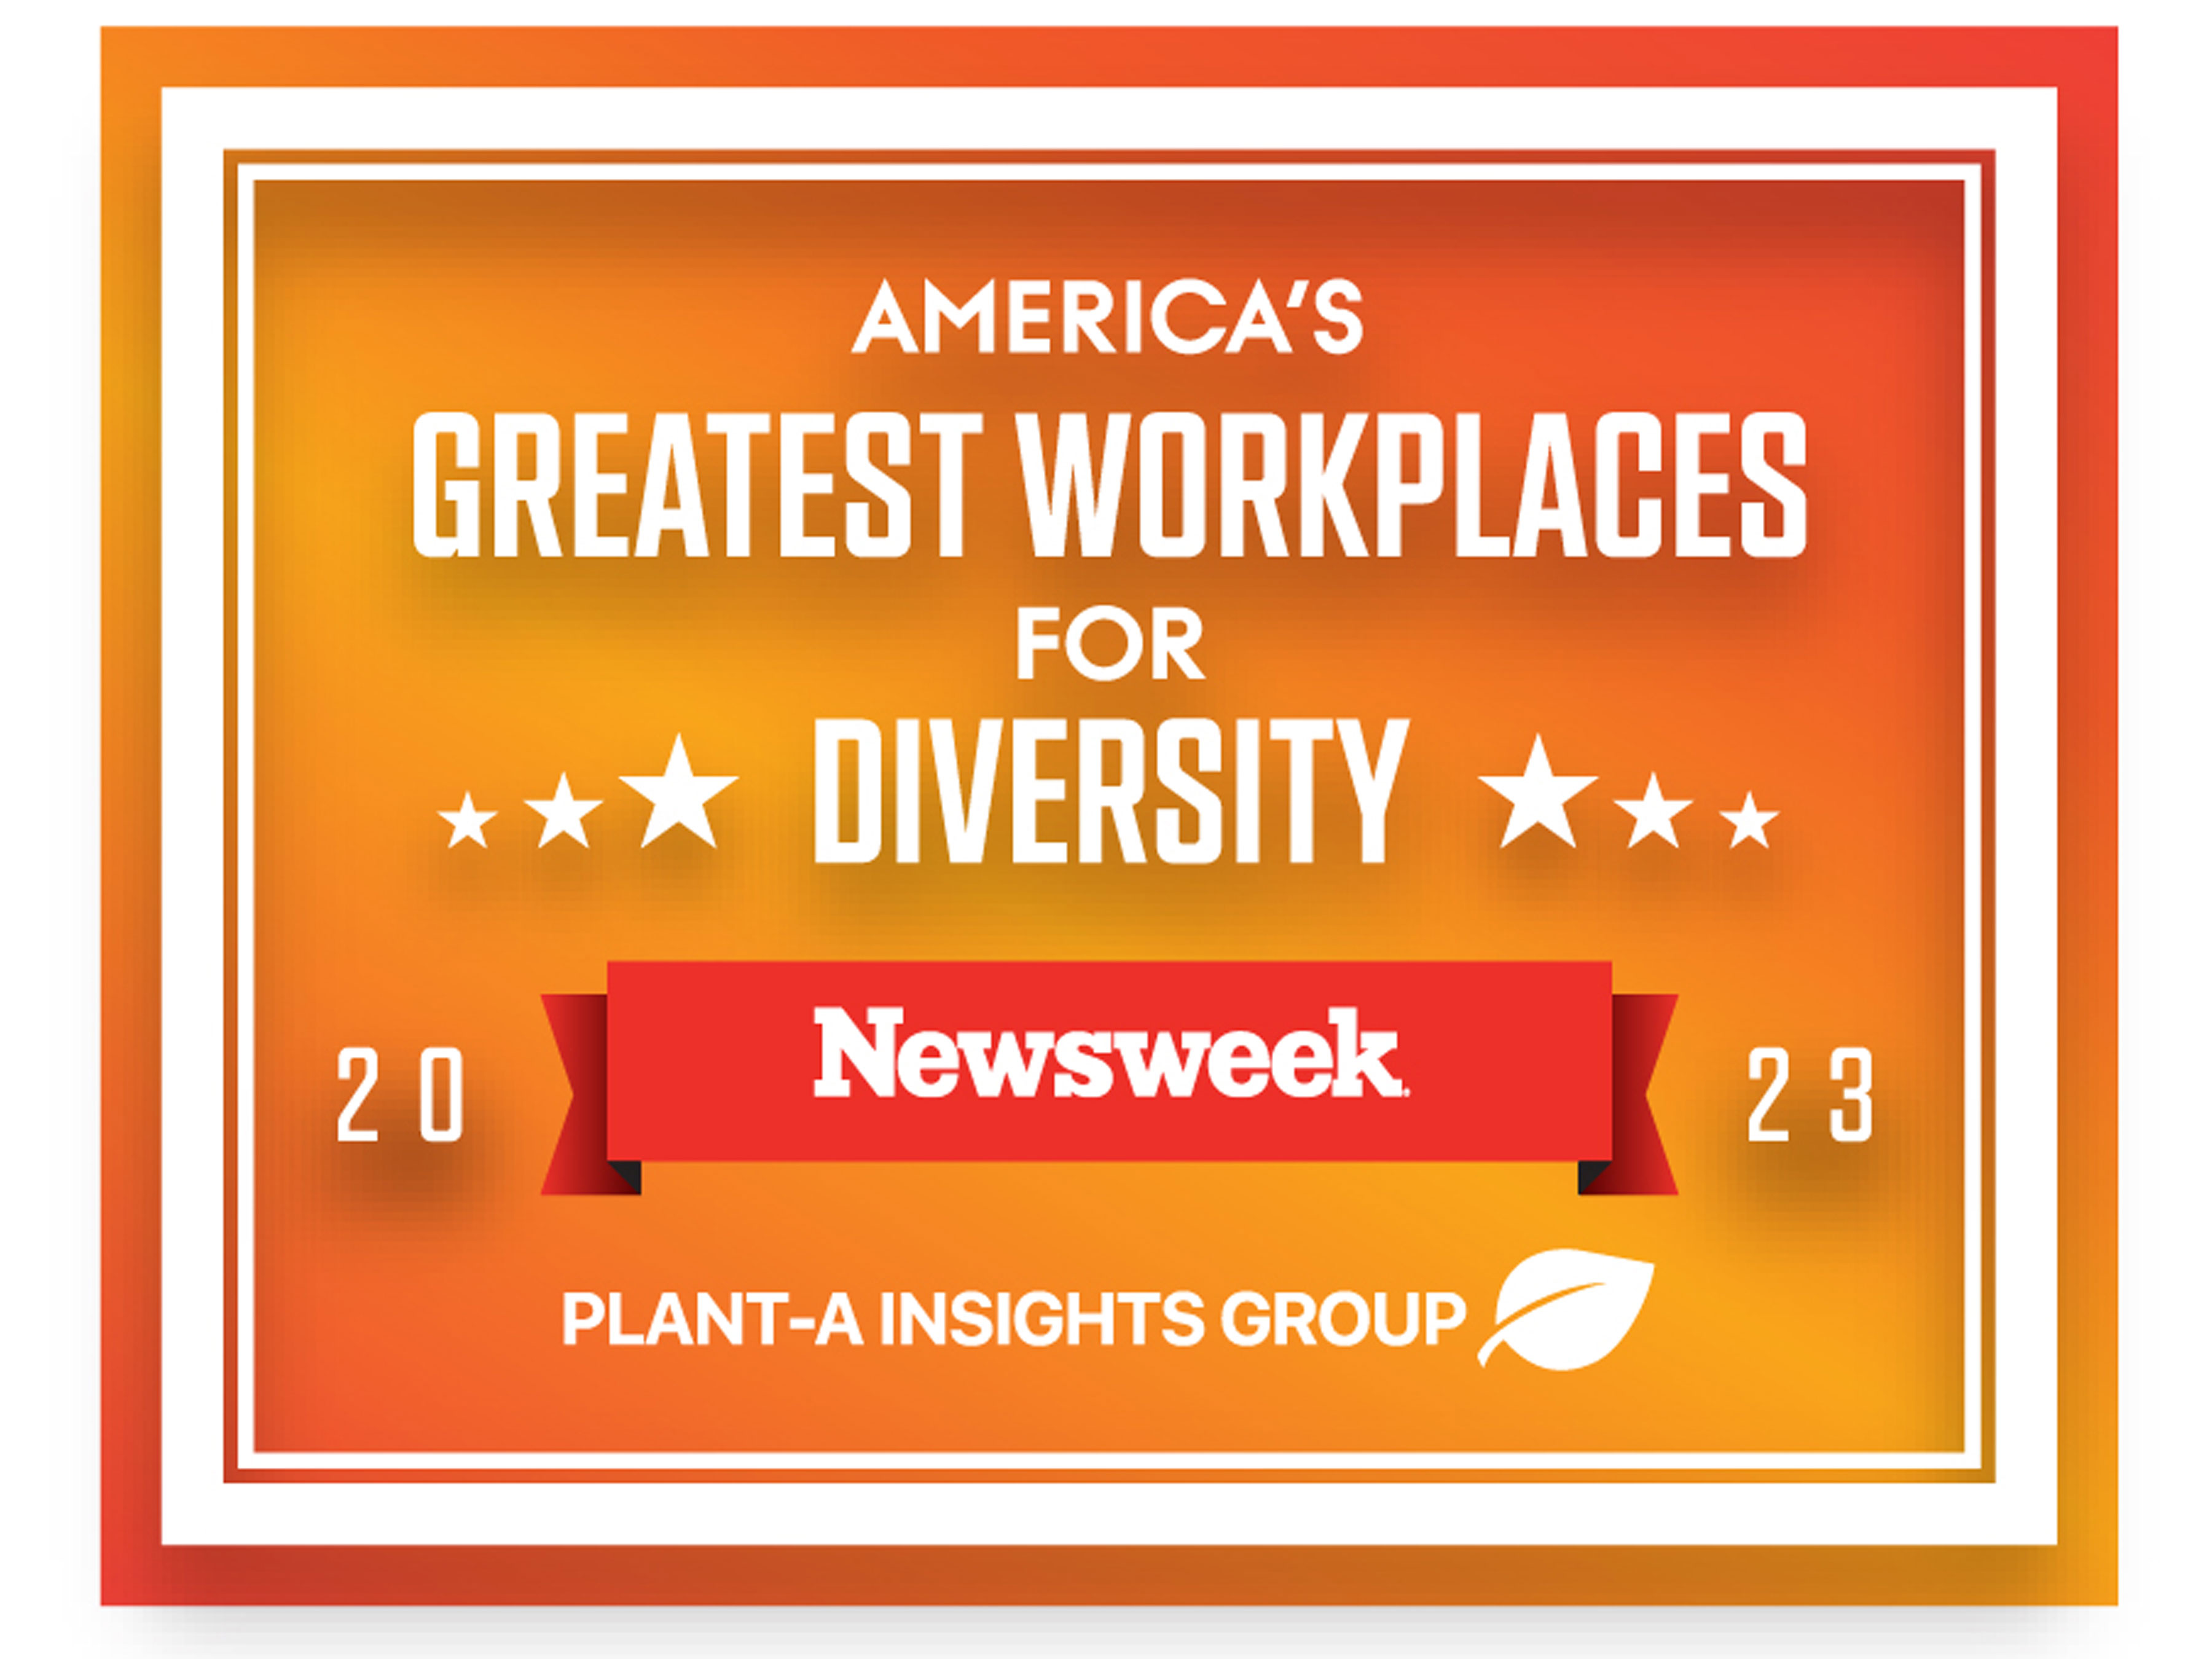 America’s Greatest Workplaces for Diversity image